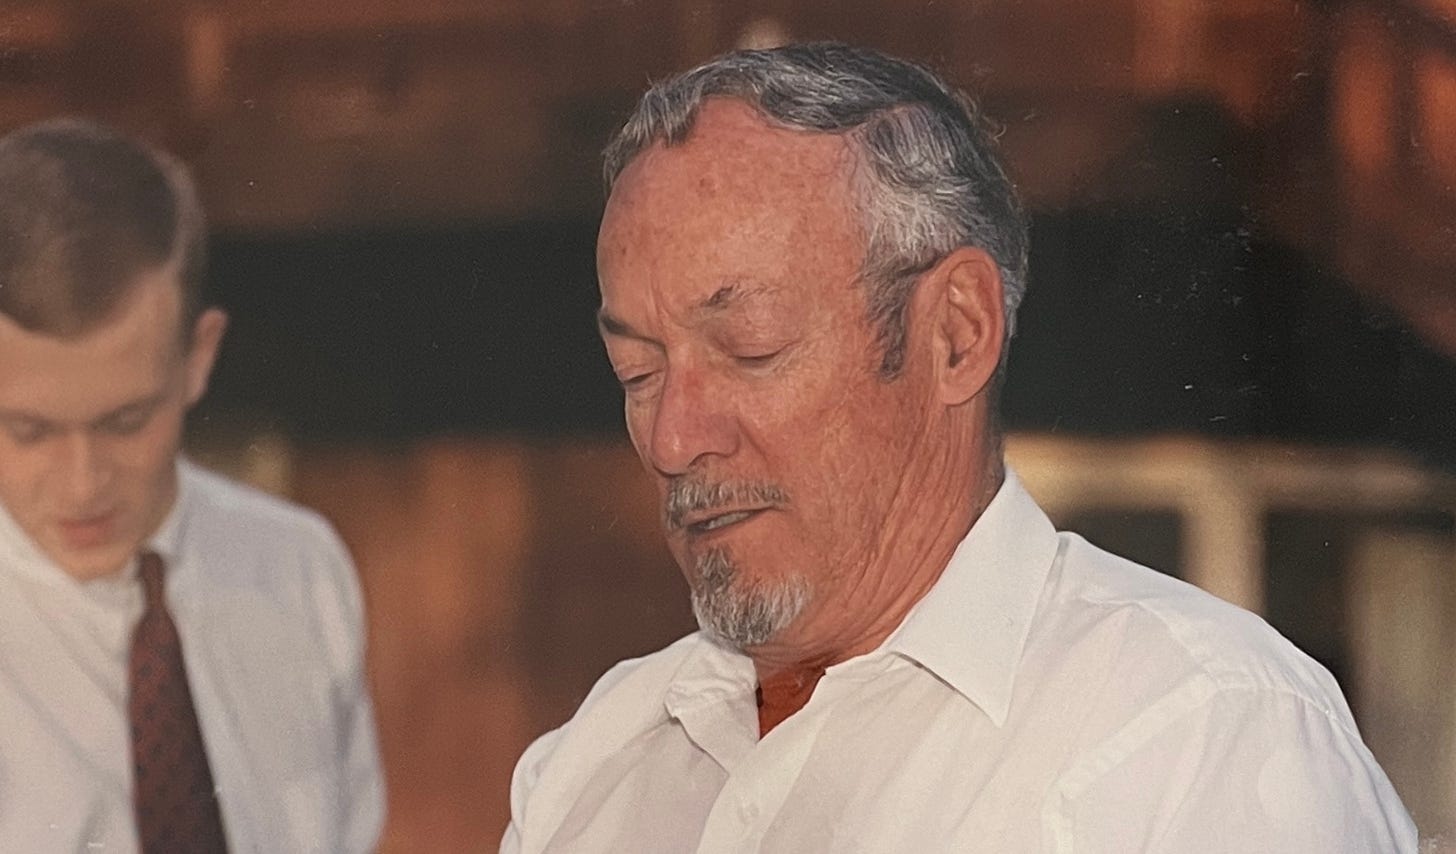 photo of an older man with a white collared shirt